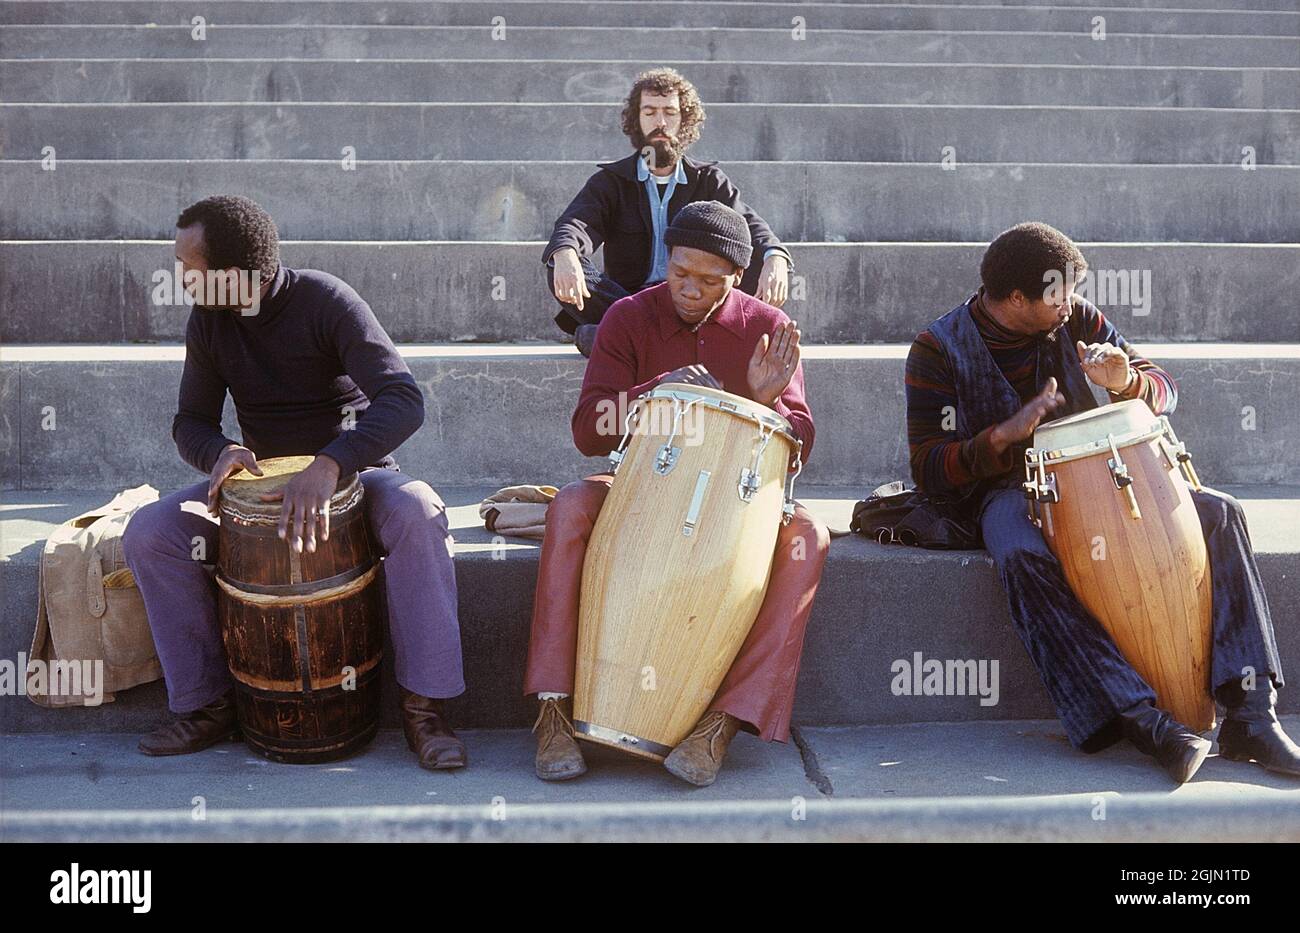 USA San Francisco 1968. Three men are playing on drums while a man is sitting in the background meditating. Kodachrome slide original.   Credit Roland Palm ref 6-1-18 Stock Photo